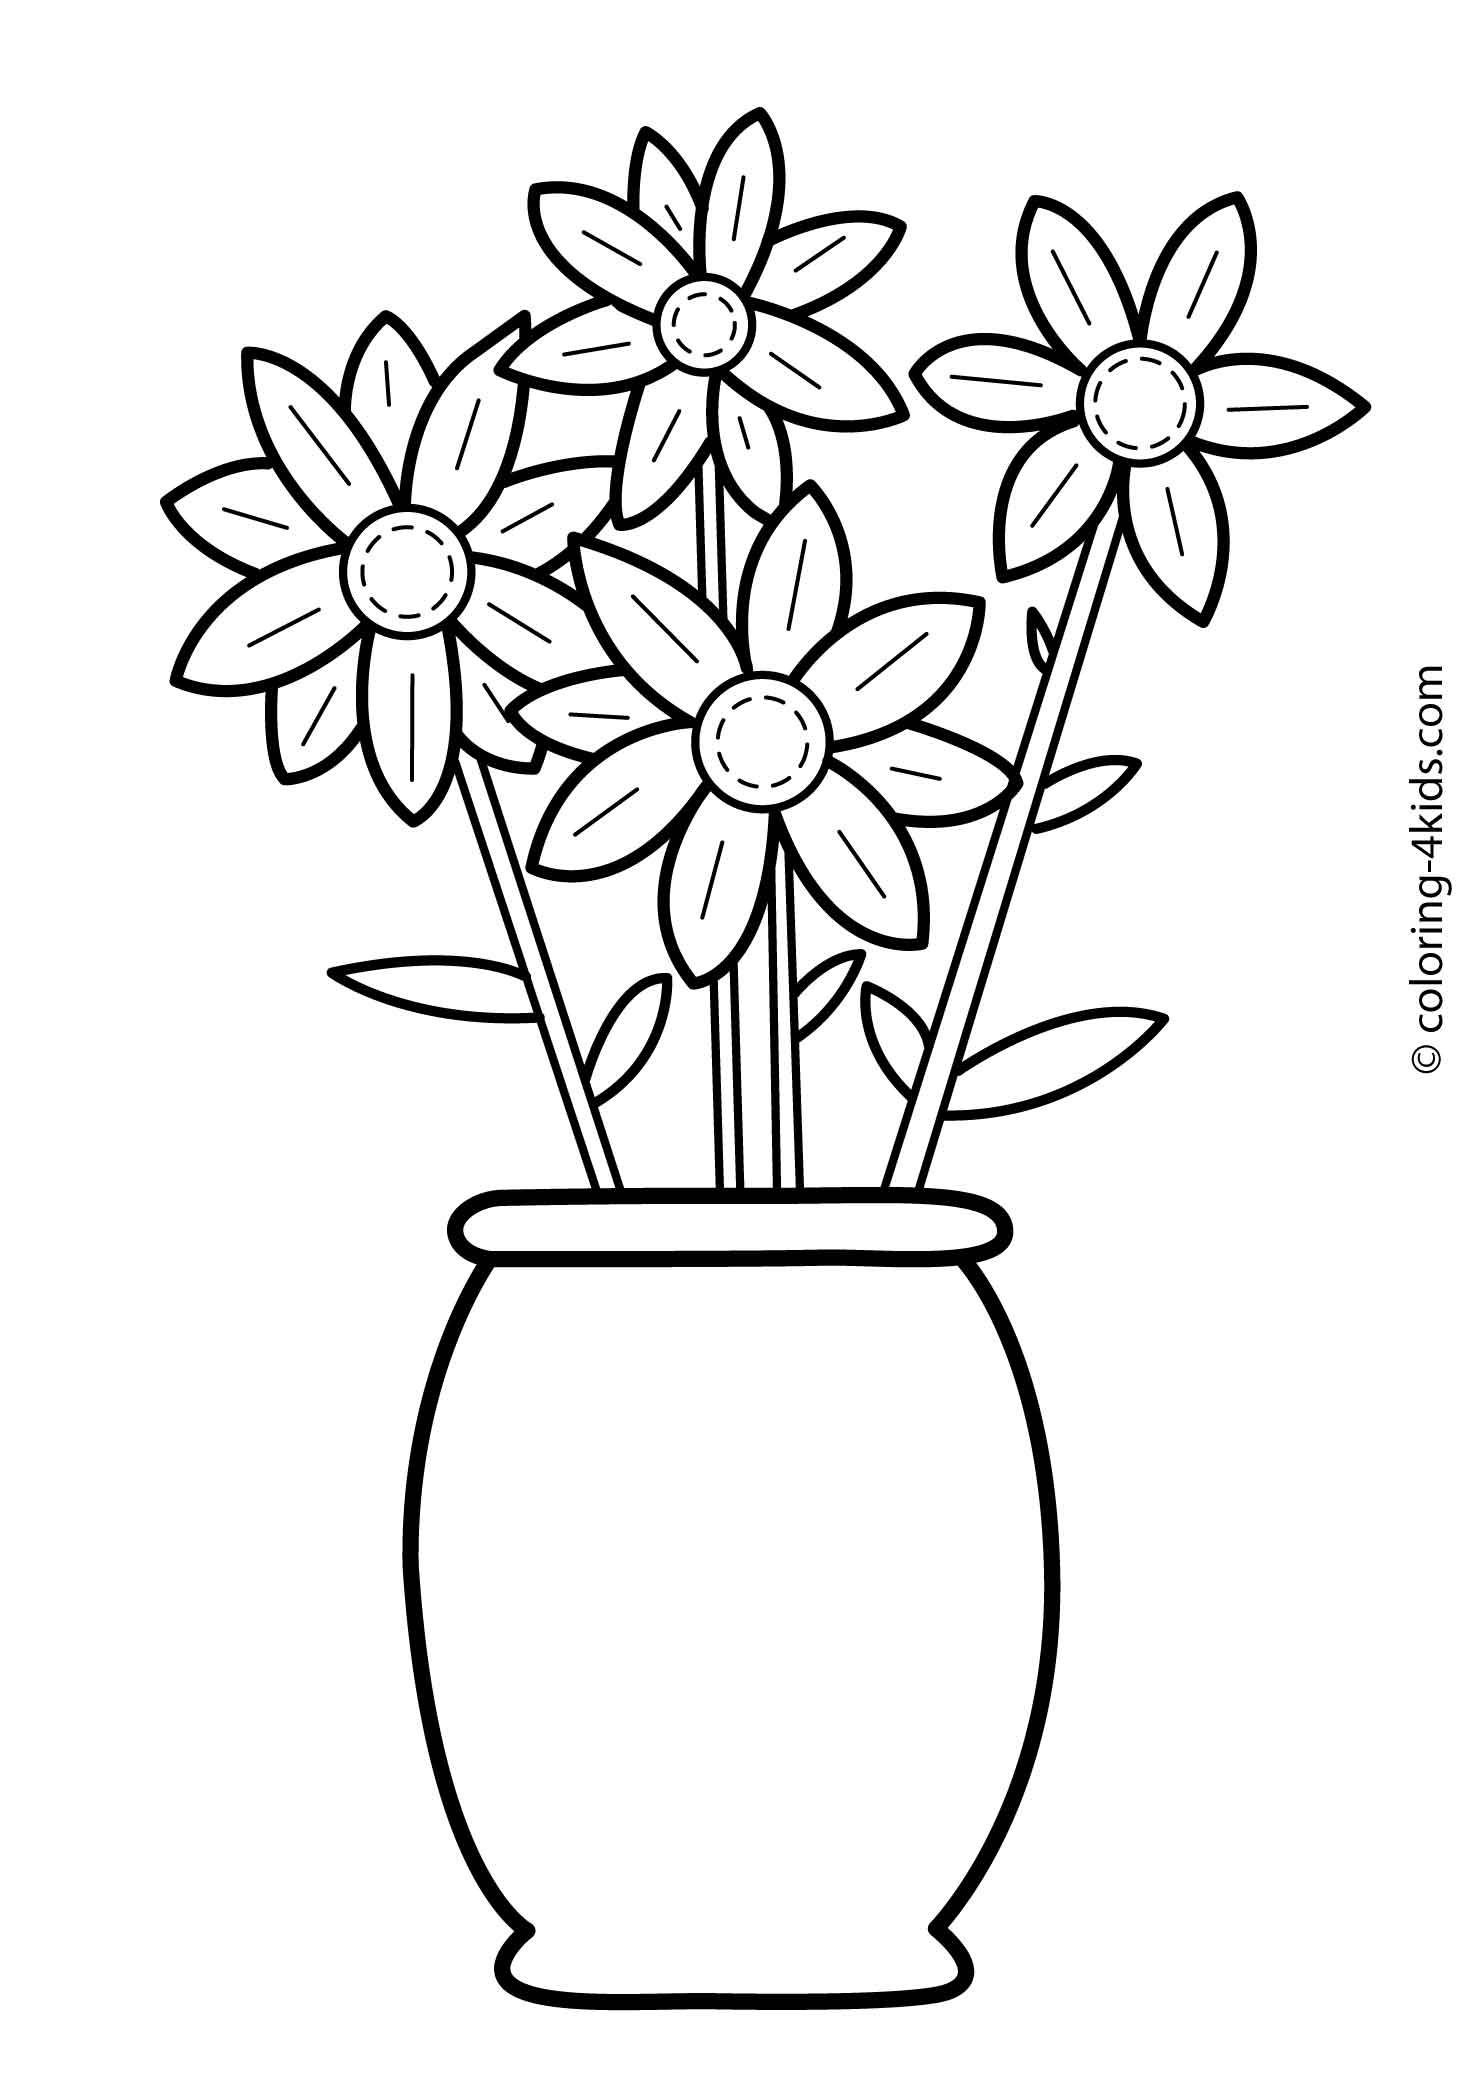 Coloring Pages Of Flowers For Kids
 Flowers coloring pages for kids printable 6